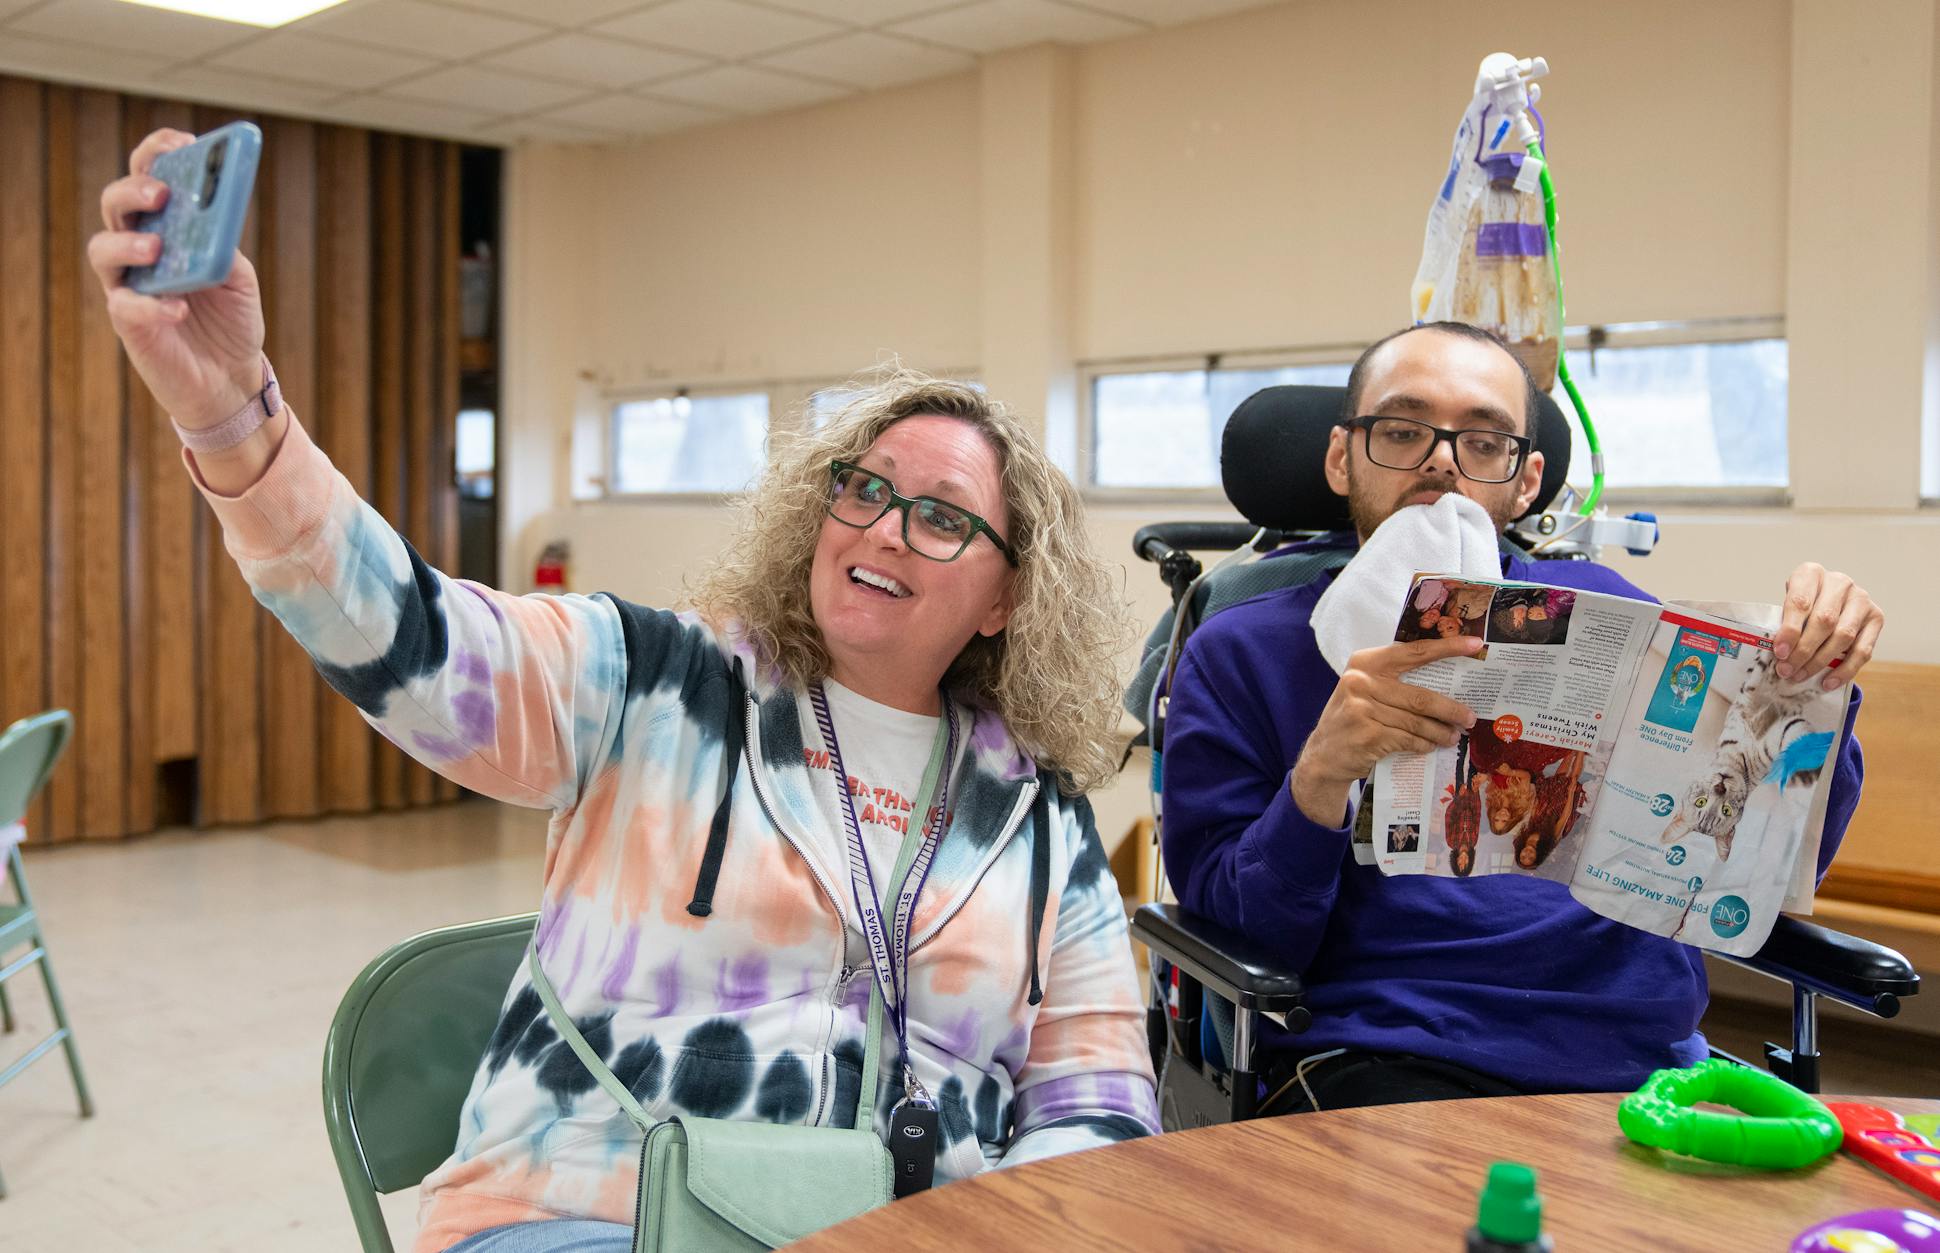 Kathy Ware takes a selfie with son Kylen during bingo night. Caring for him can be difficult, Kathy says, but she doesn't think of it “as a burden.” 